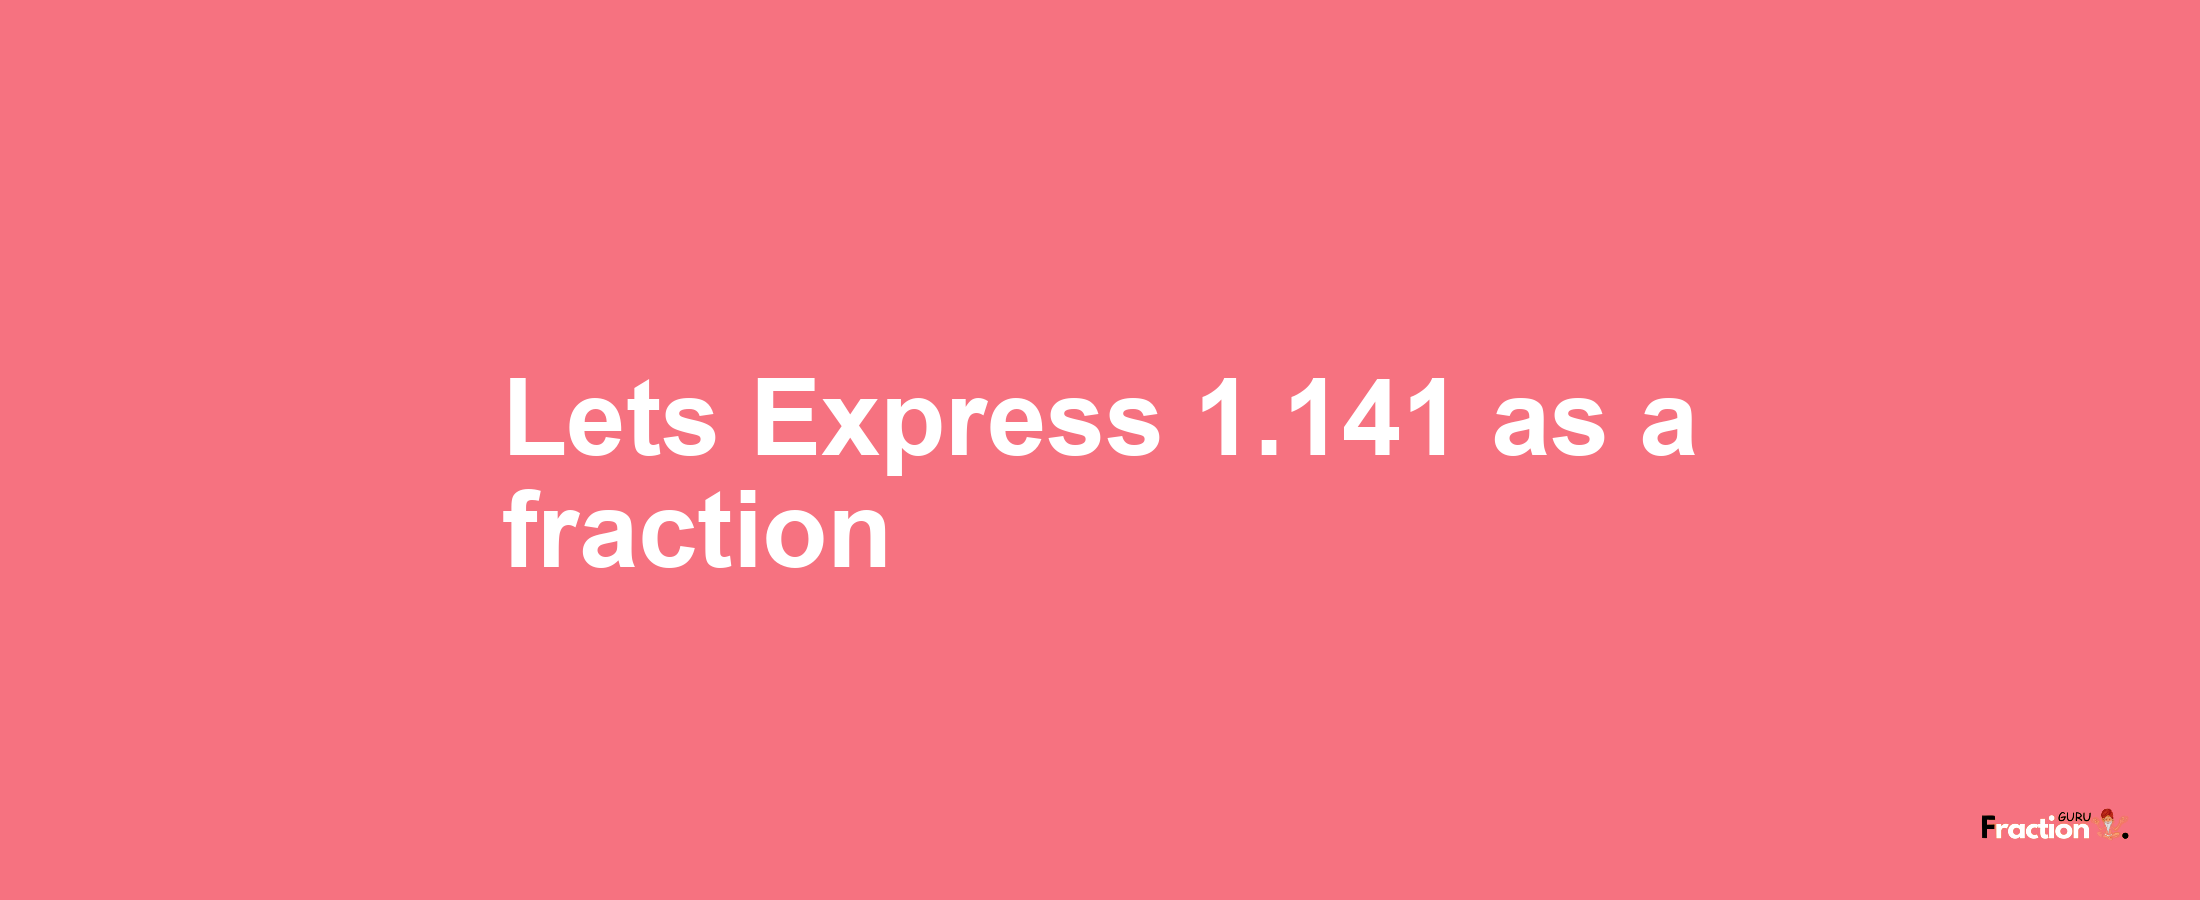 Lets Express 1.141 as afraction